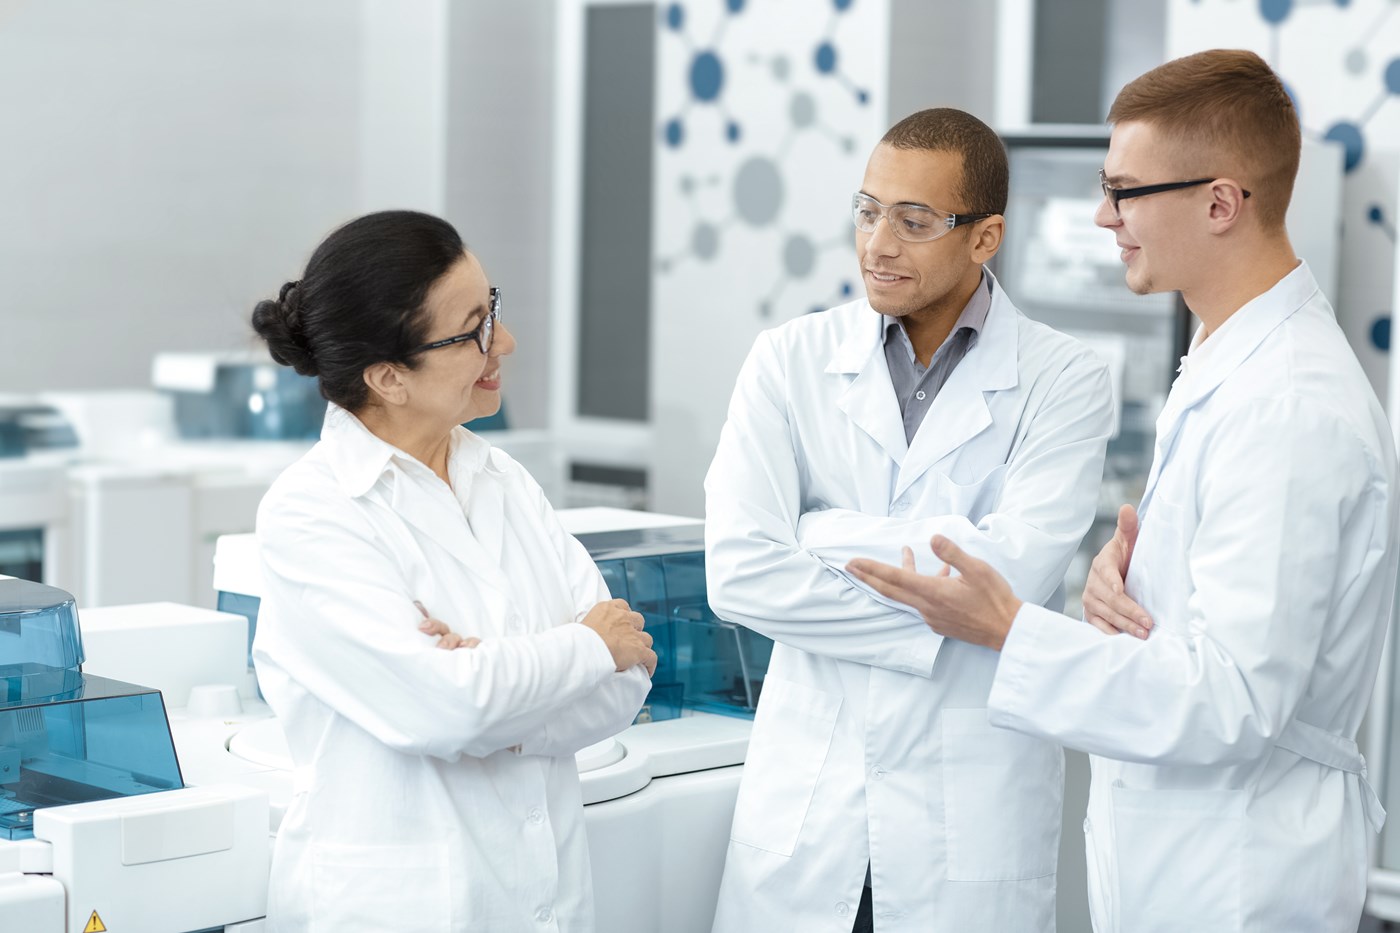 A woman and two men in white lab coats chat